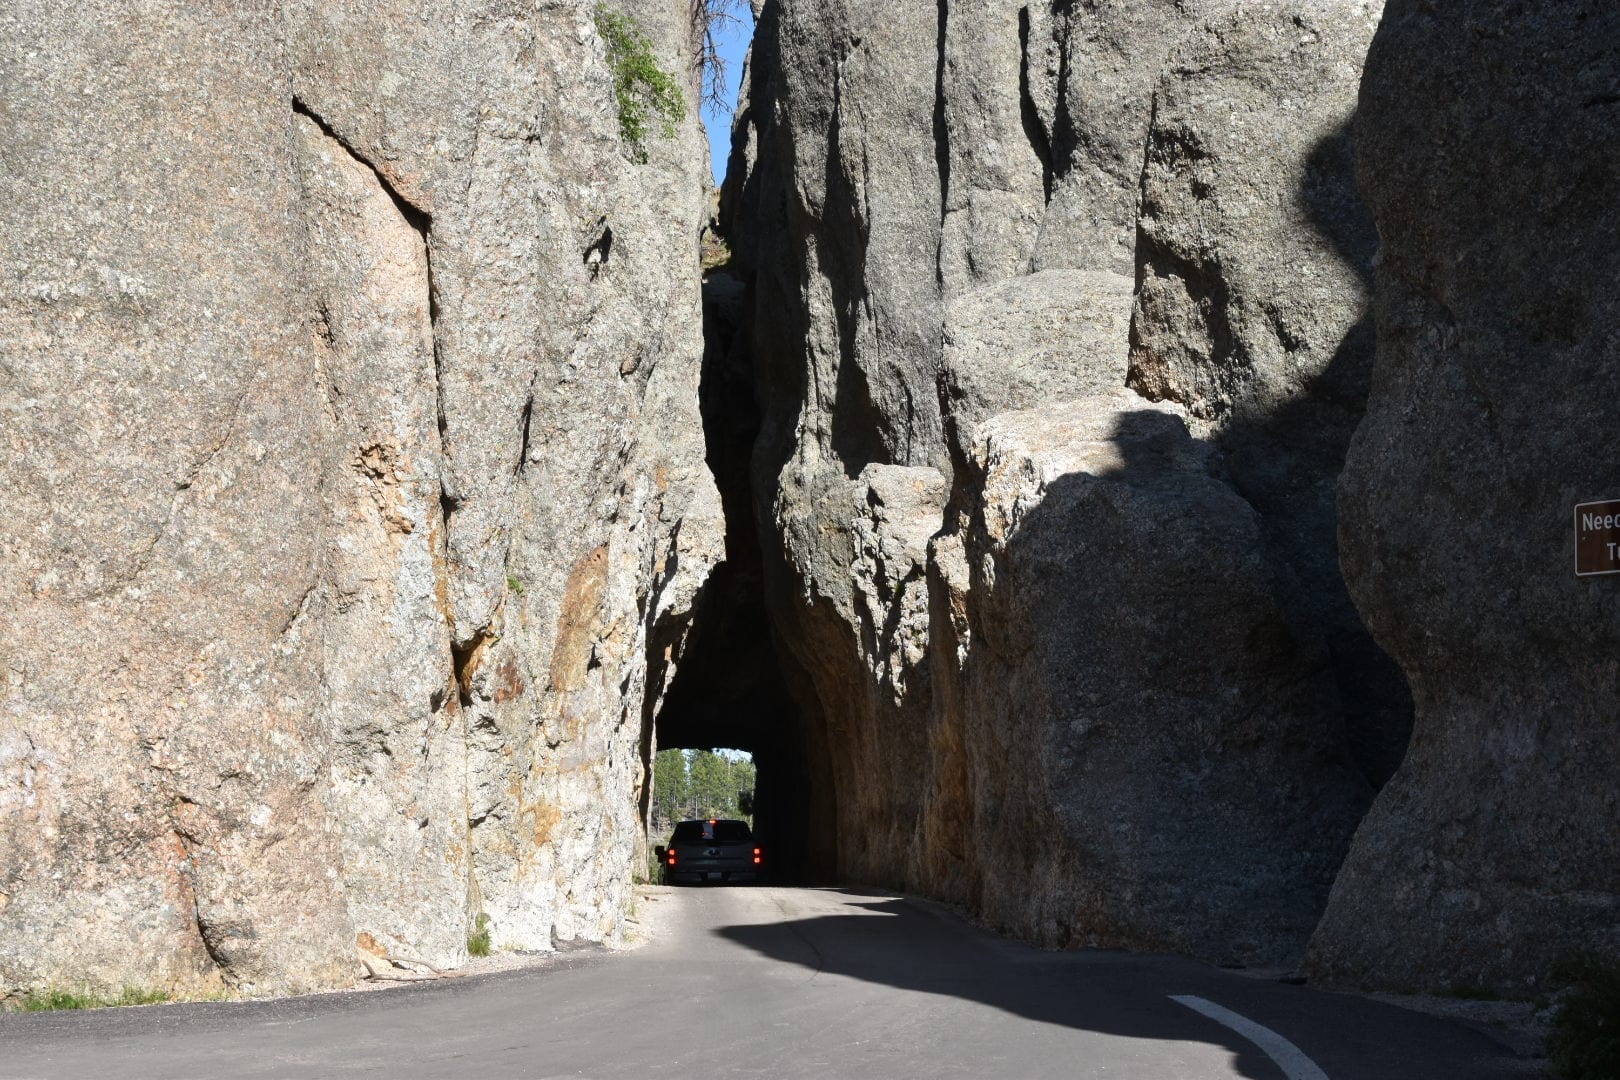 Needles Highway Tunnel at Custer State Park